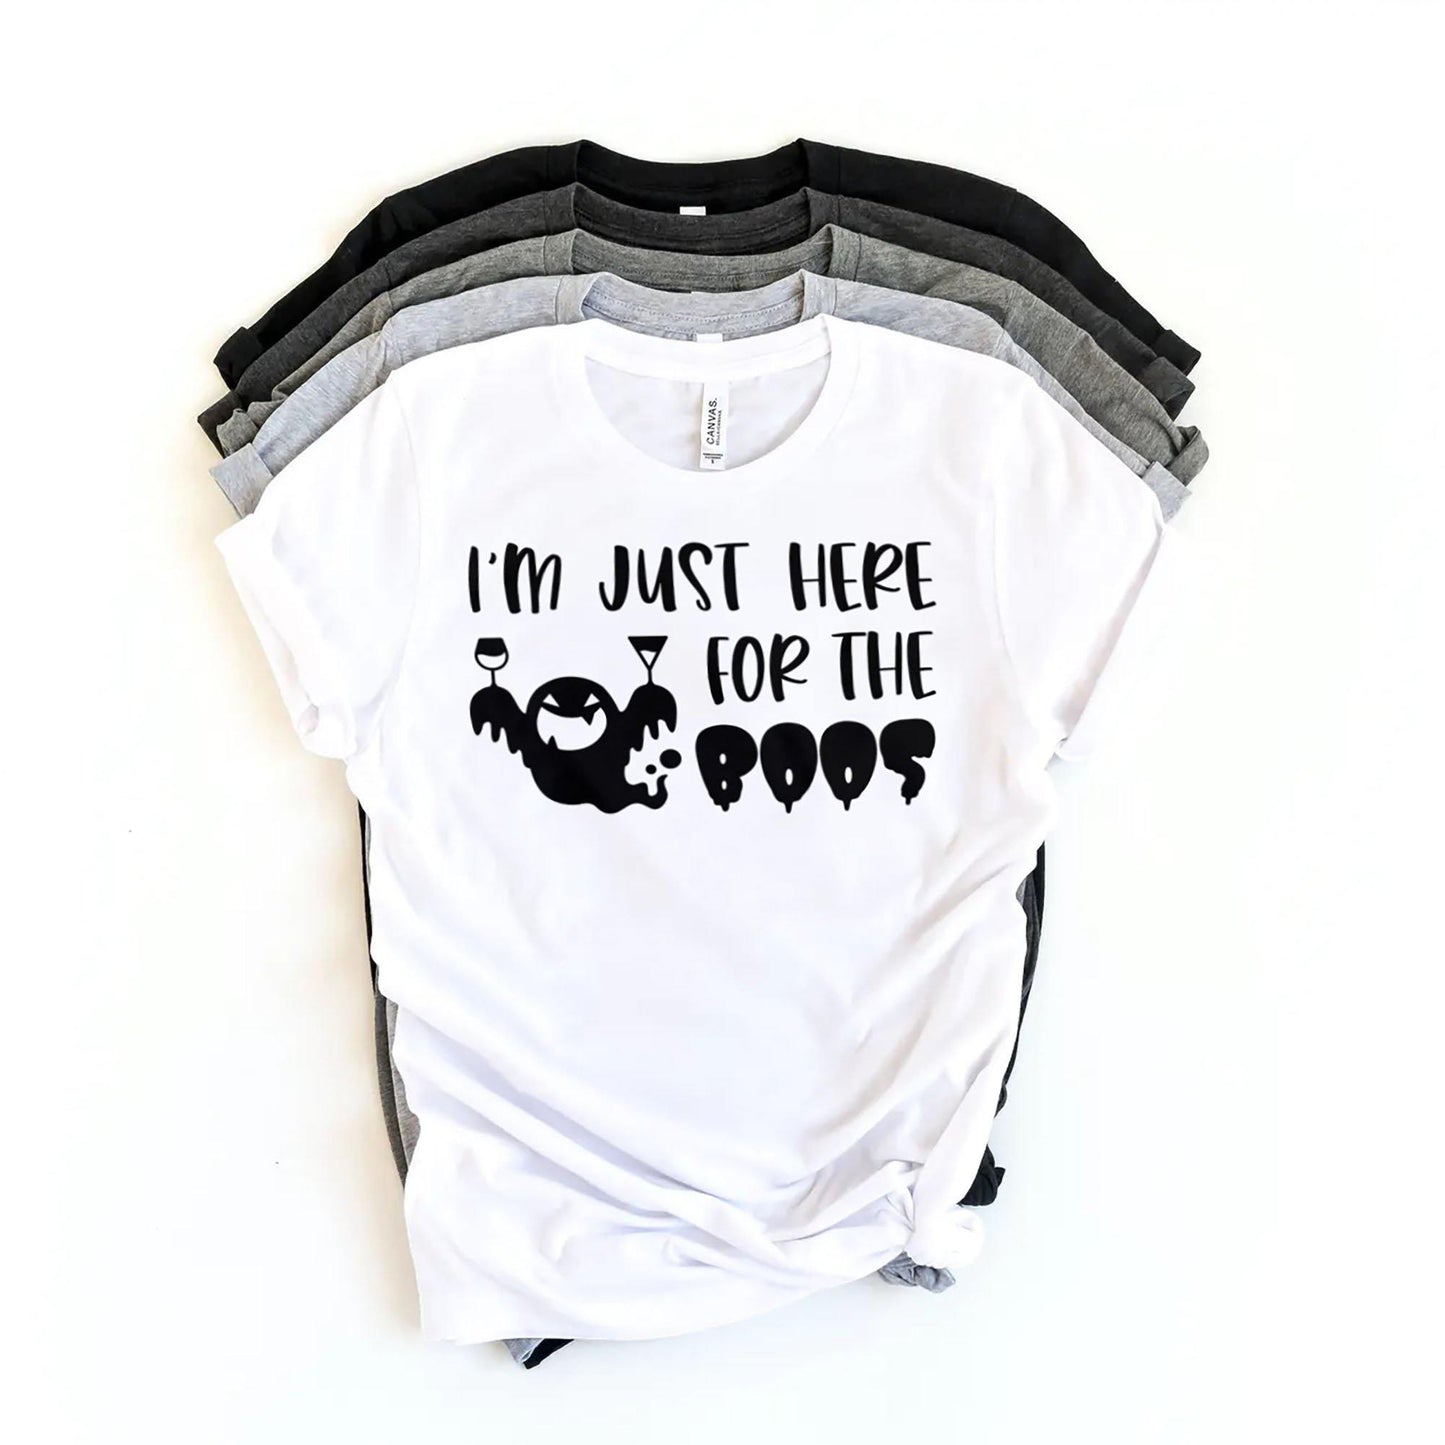 I'm Just Here for the Boos - Halloween T-Shirt - Healthy Wealthy Skinny